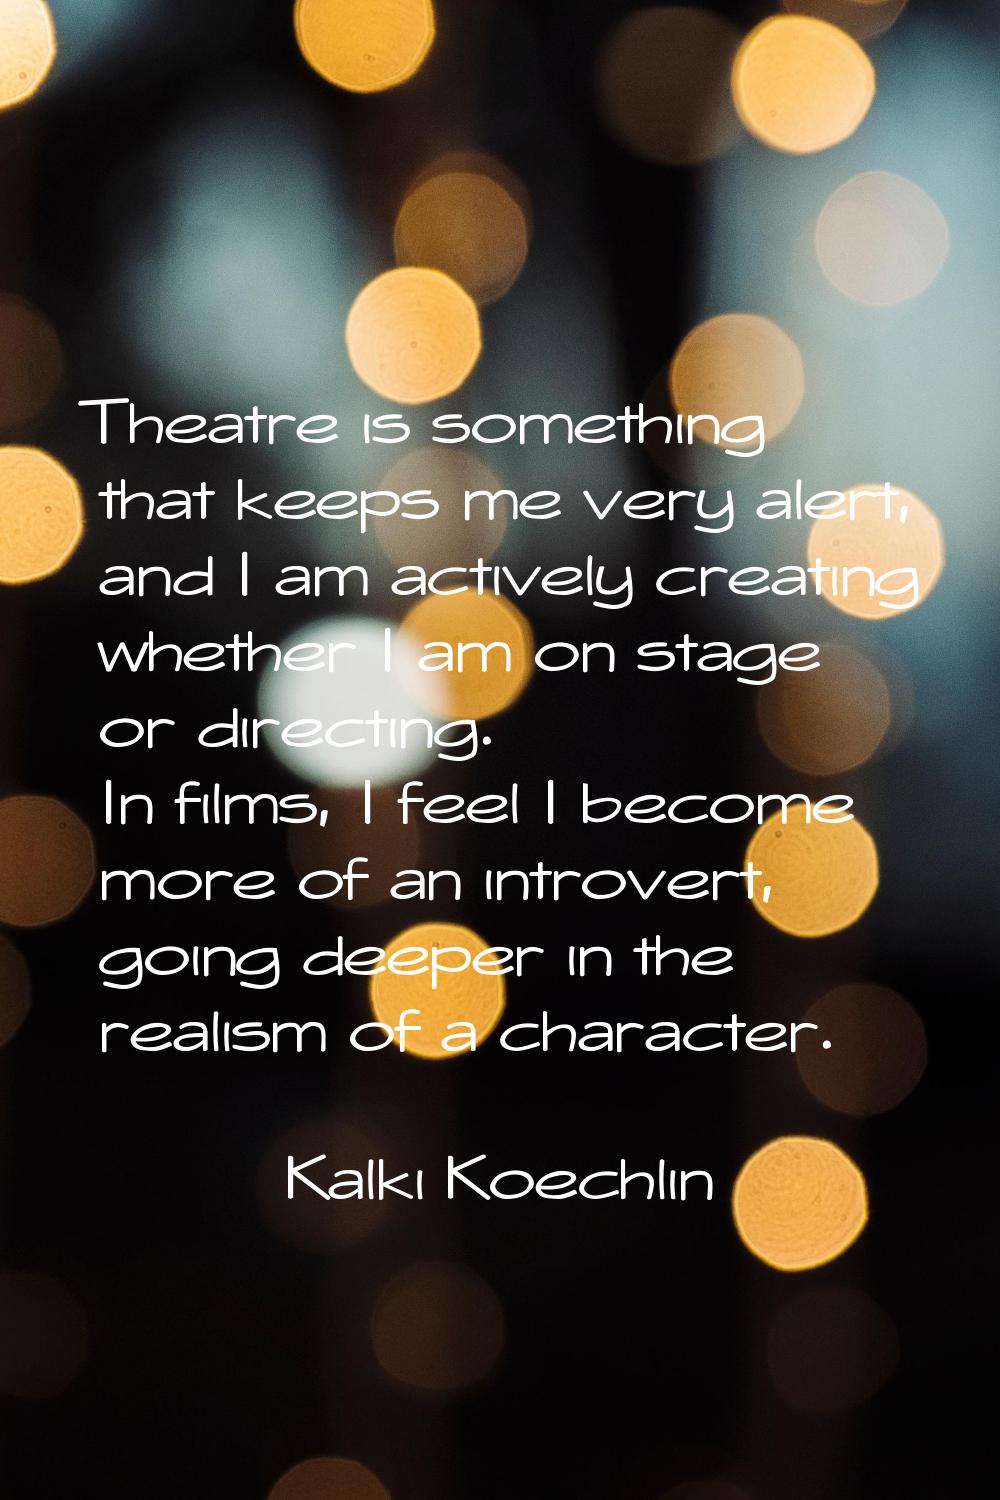 Theatre is something that keeps me very alert, and I am actively creating whether I am on stage or 